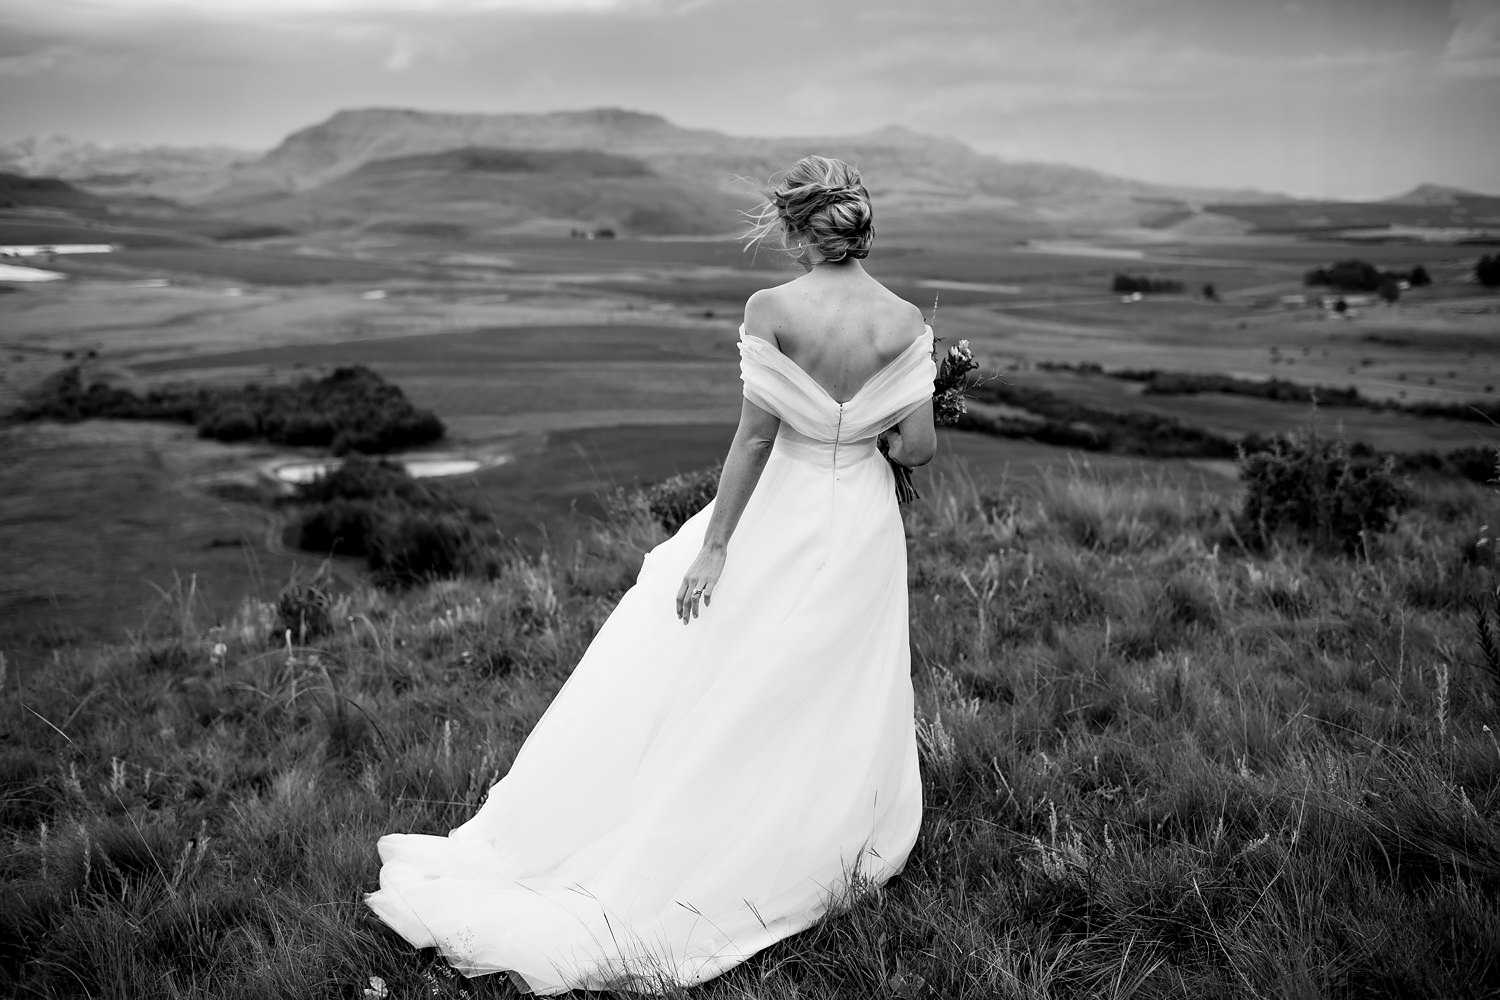 A bride walks away from the camera after her Drakensberg wedding ceremony in this black and white image by Niki M Photography.